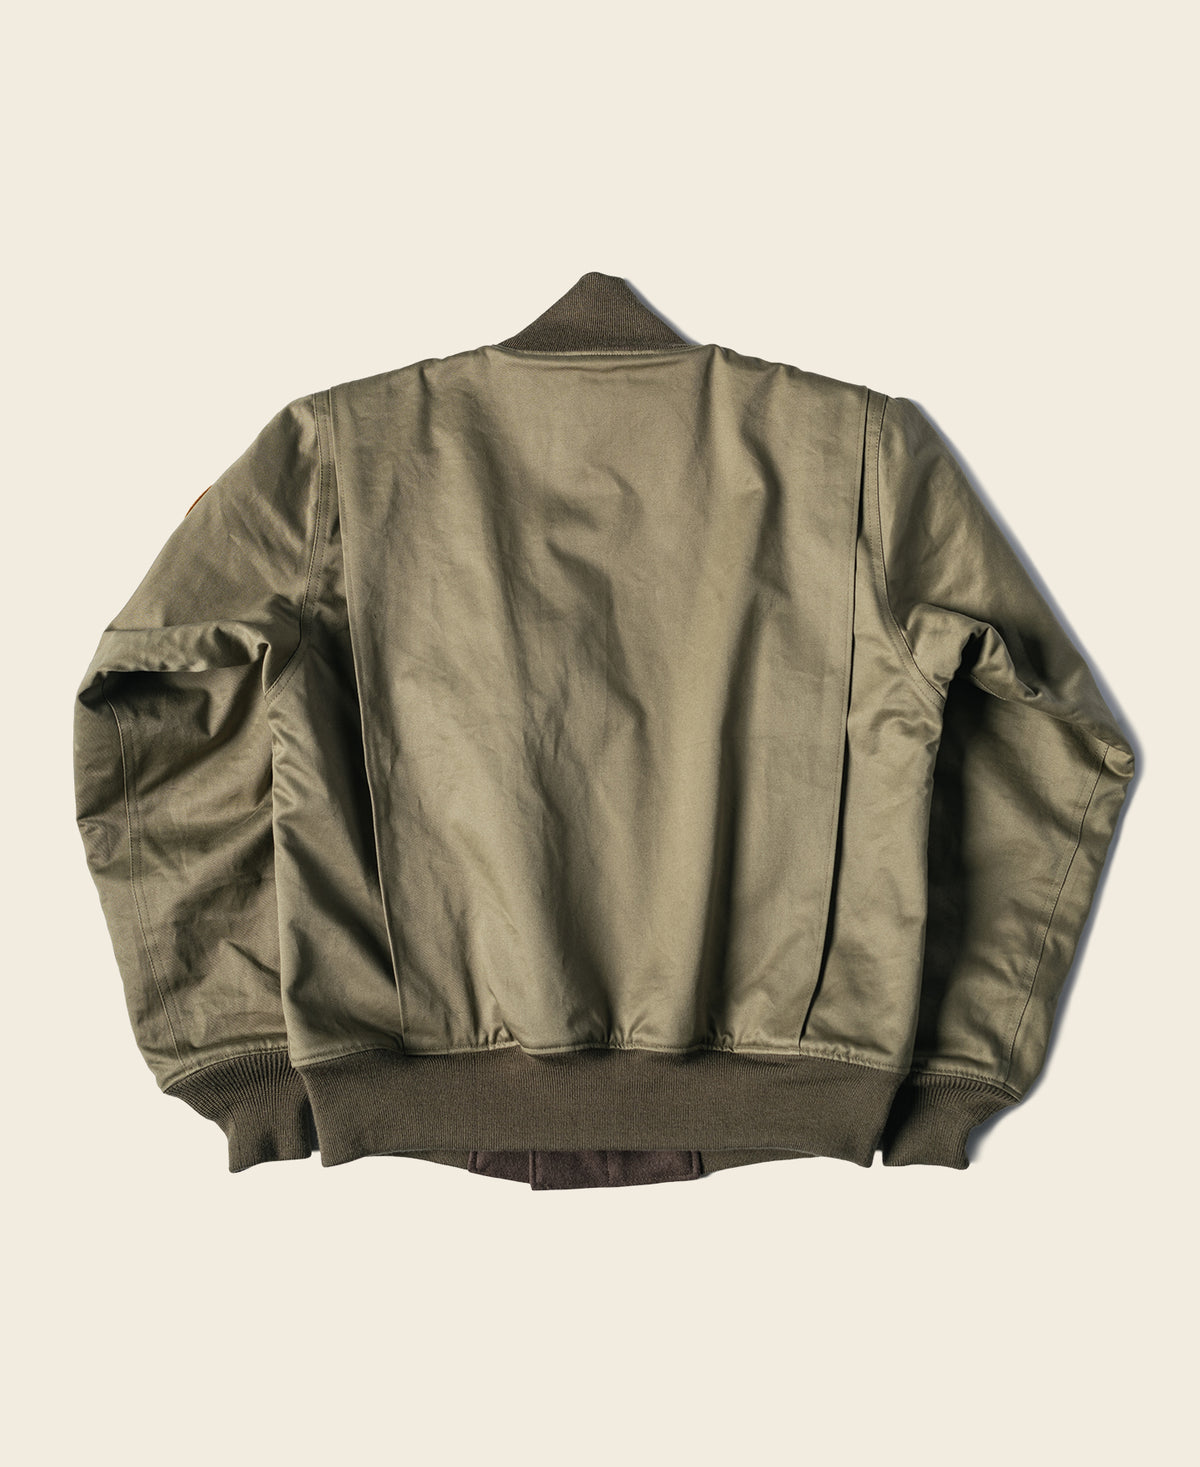 US Army 2nd Tanker Jacket - Taxi Driver Model